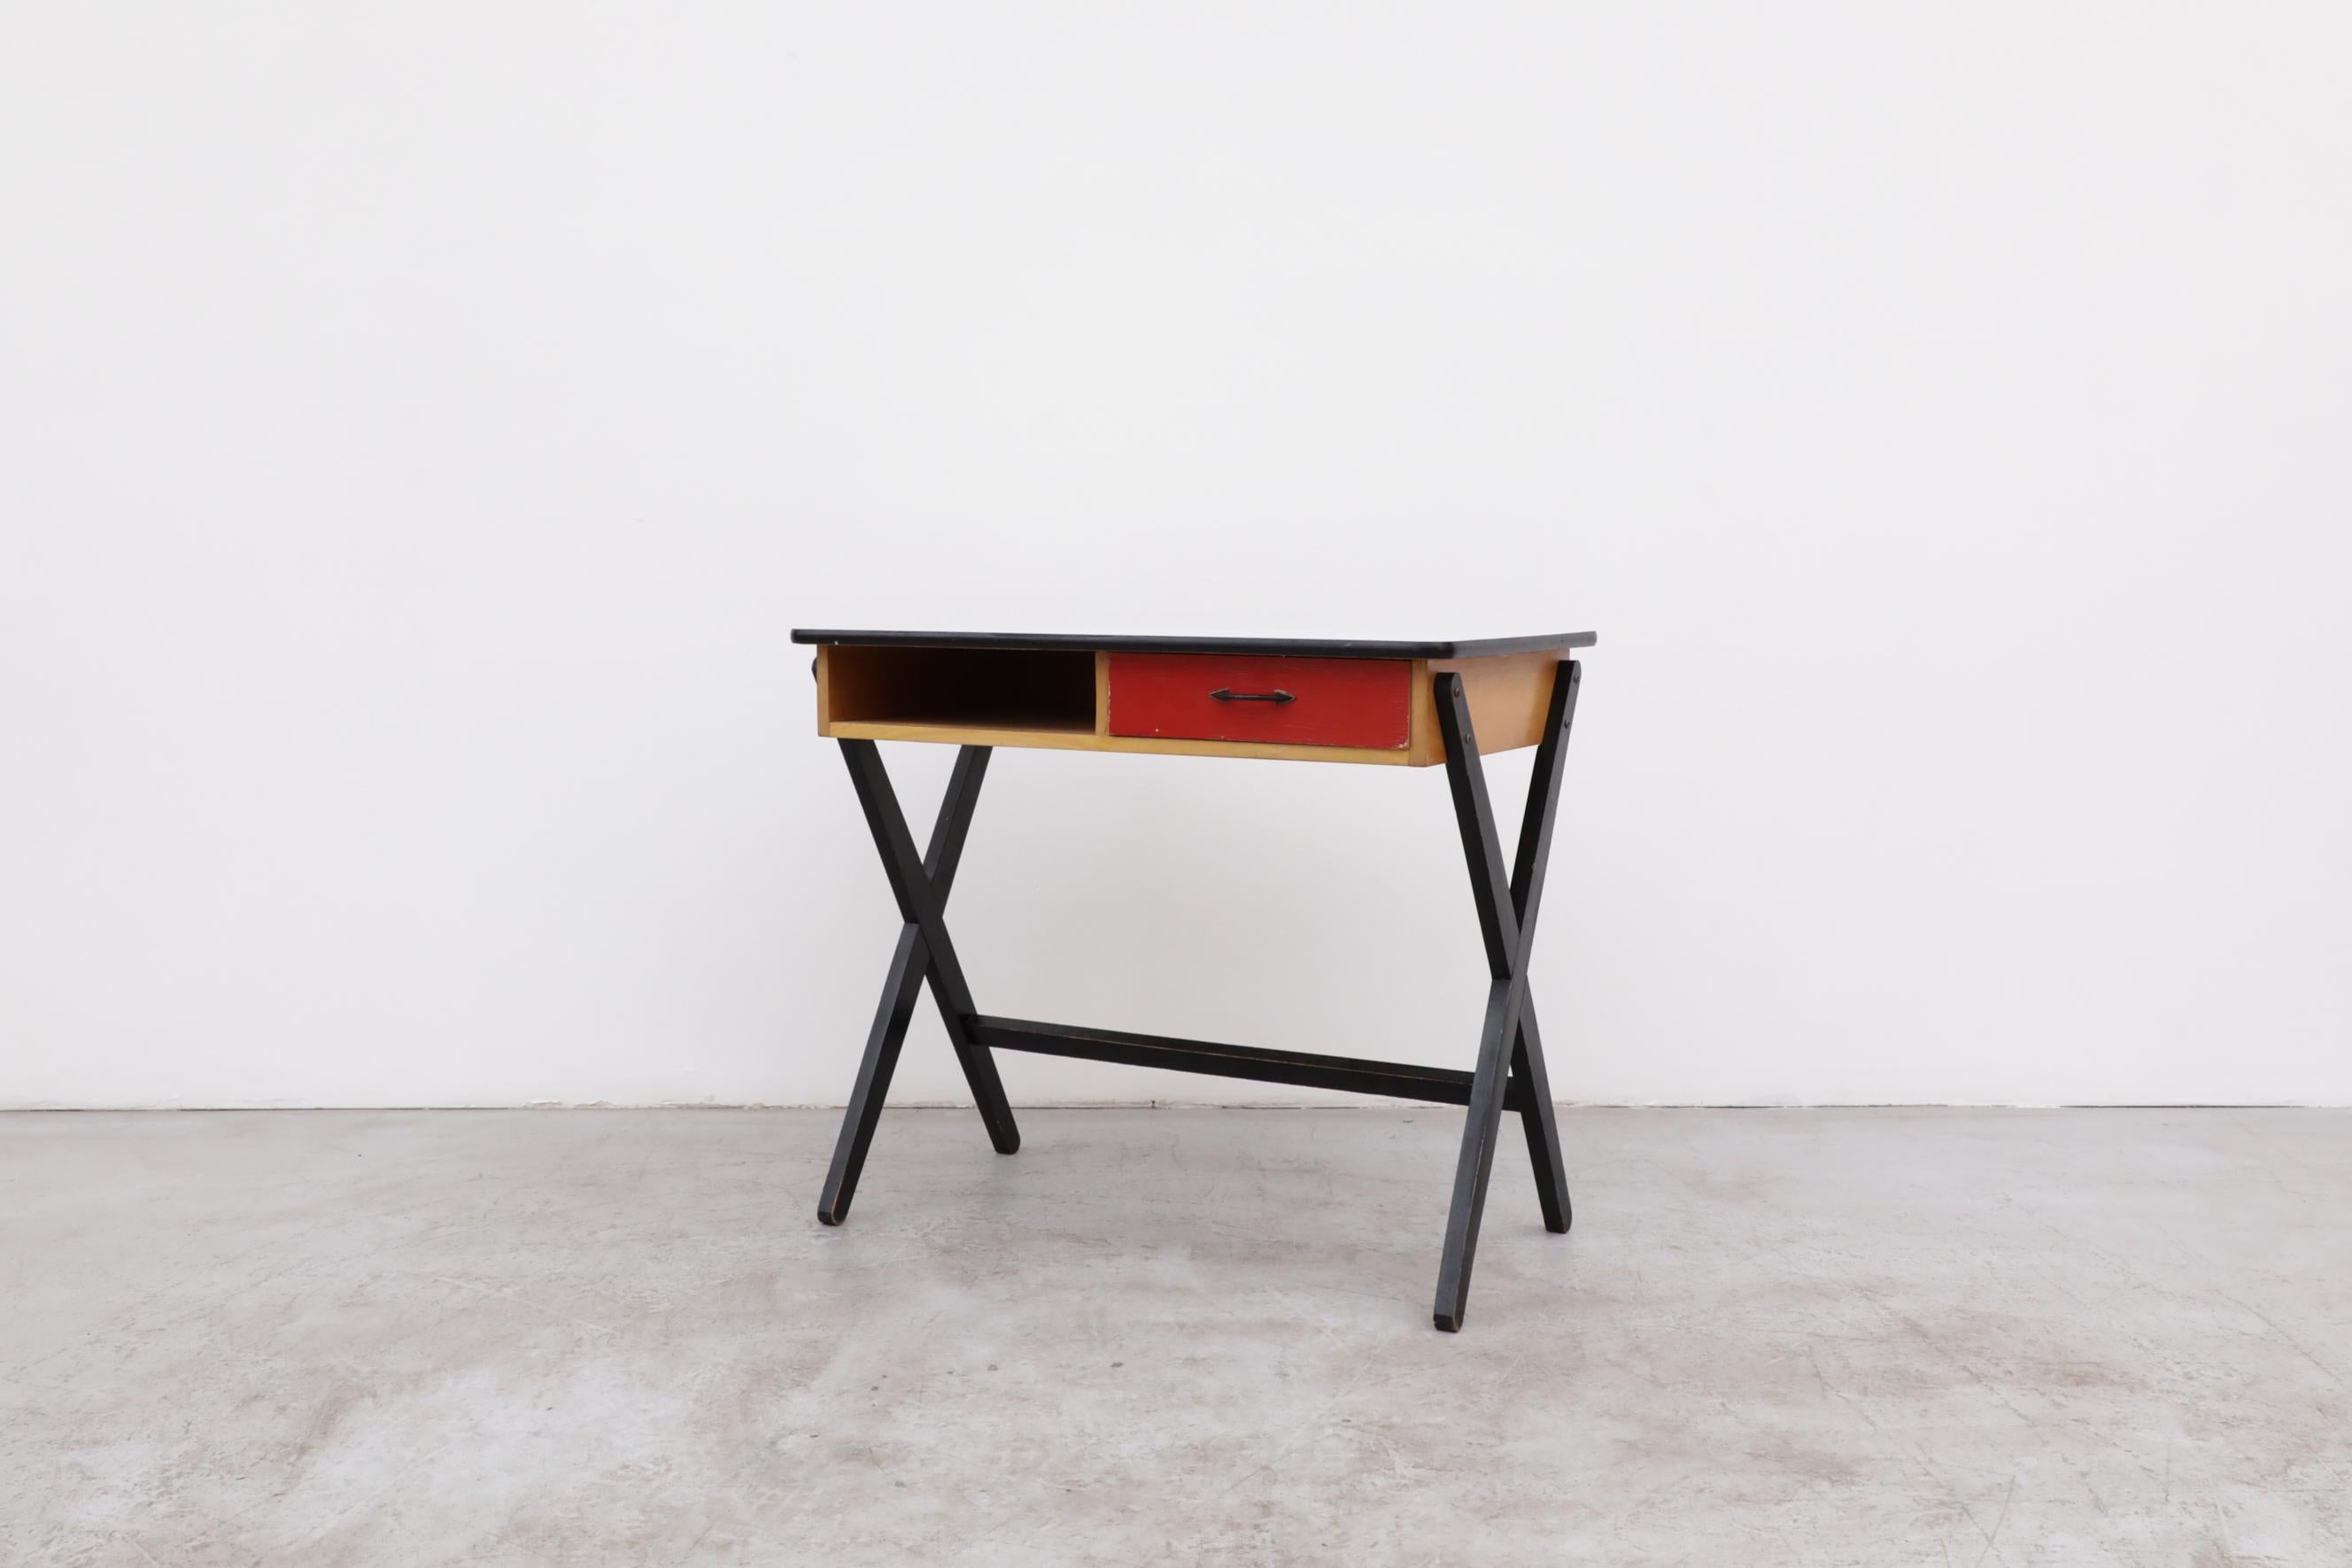 Great little writing desk in birch wood with ebony x-base, colored drawer and formica top. Coen de Vries is one of the Dutch pioneers of industrial design. Many of Coen de Vries' practical designs were recommended by Goed Wonen (Good Living), a